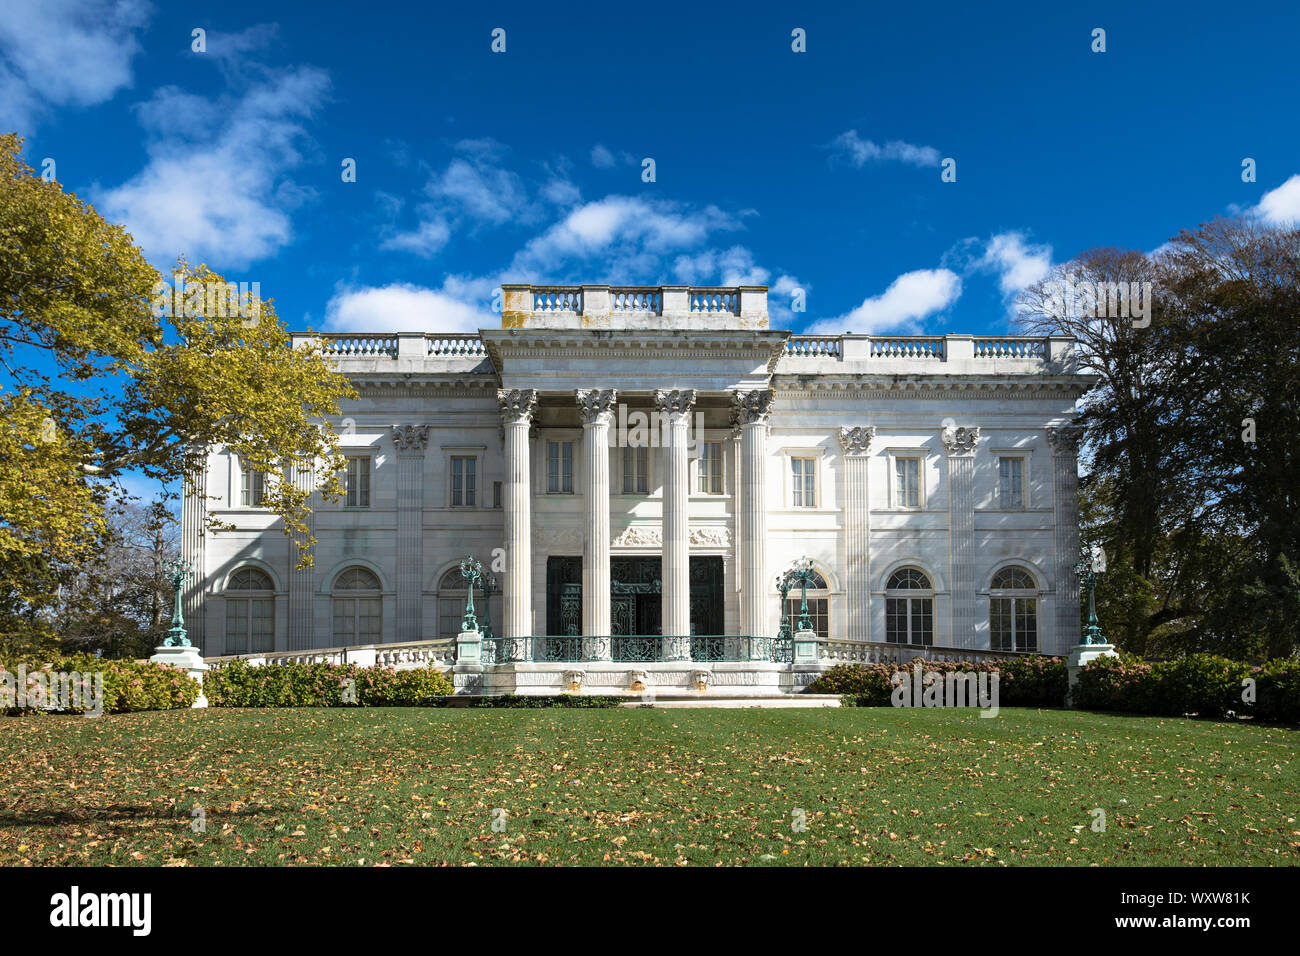 Marble House Mansion built 1892, one of the famous elegant Newport Mansions on Rhode Island, USA Stock Photo